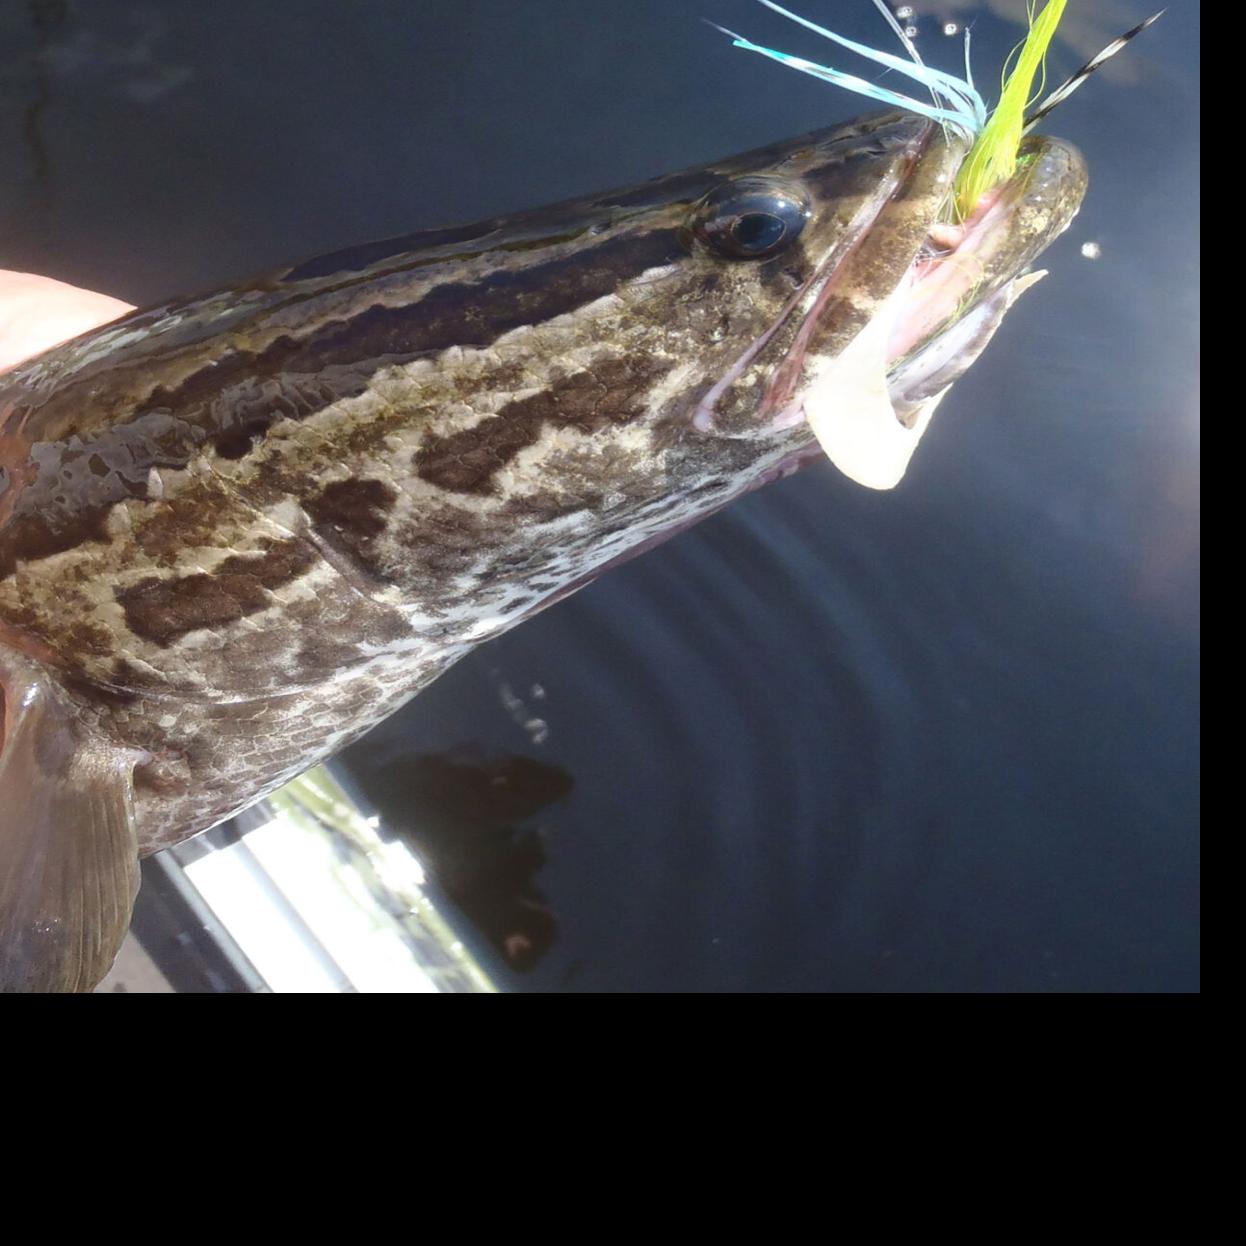 Today's Sportsman: Casting for snakeheads on the Eastern Shore